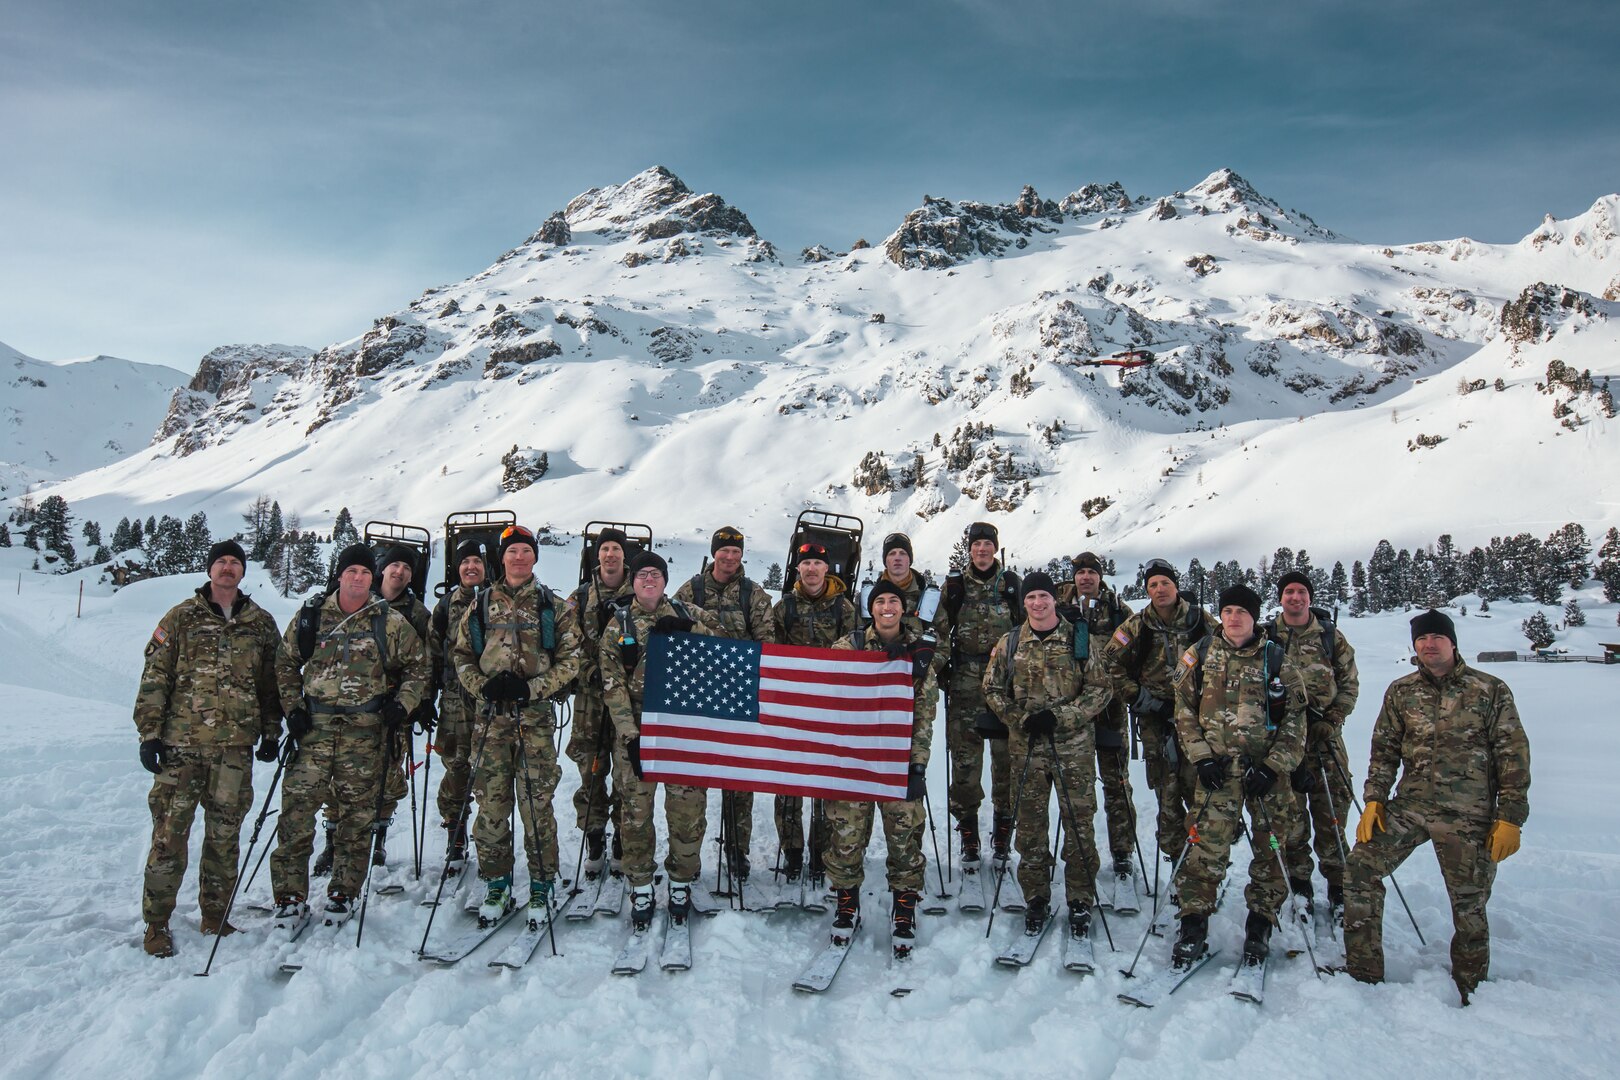 The 2023 U.S. Army Edelweiss Raid Team poses for a photo before the start of the 2023 competition Feb. 28, 2023, in Training Area Lizum, Innsbruck, Austria. The 86th Infantry Brigade Combat Team (Mountain) led a team of 16 Soldiers to a 10th and 18th place finish out of a field of 22 teams.